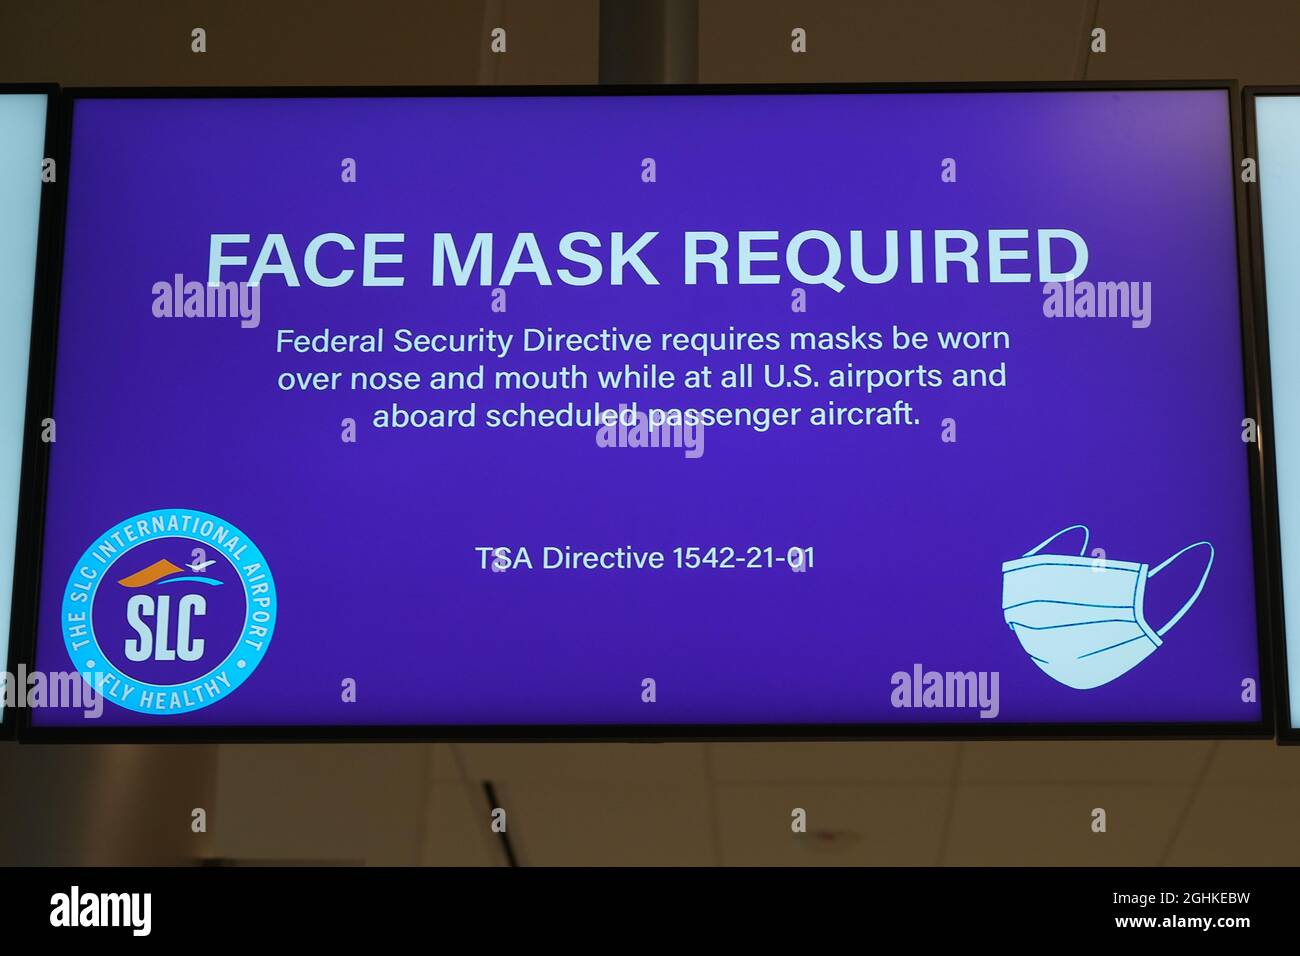 A face mask required sign at the TSA security checkpoint at the Salt Lake City International Airport amid the global coronavirus COVID-19 pandemic, Su Stock Photo